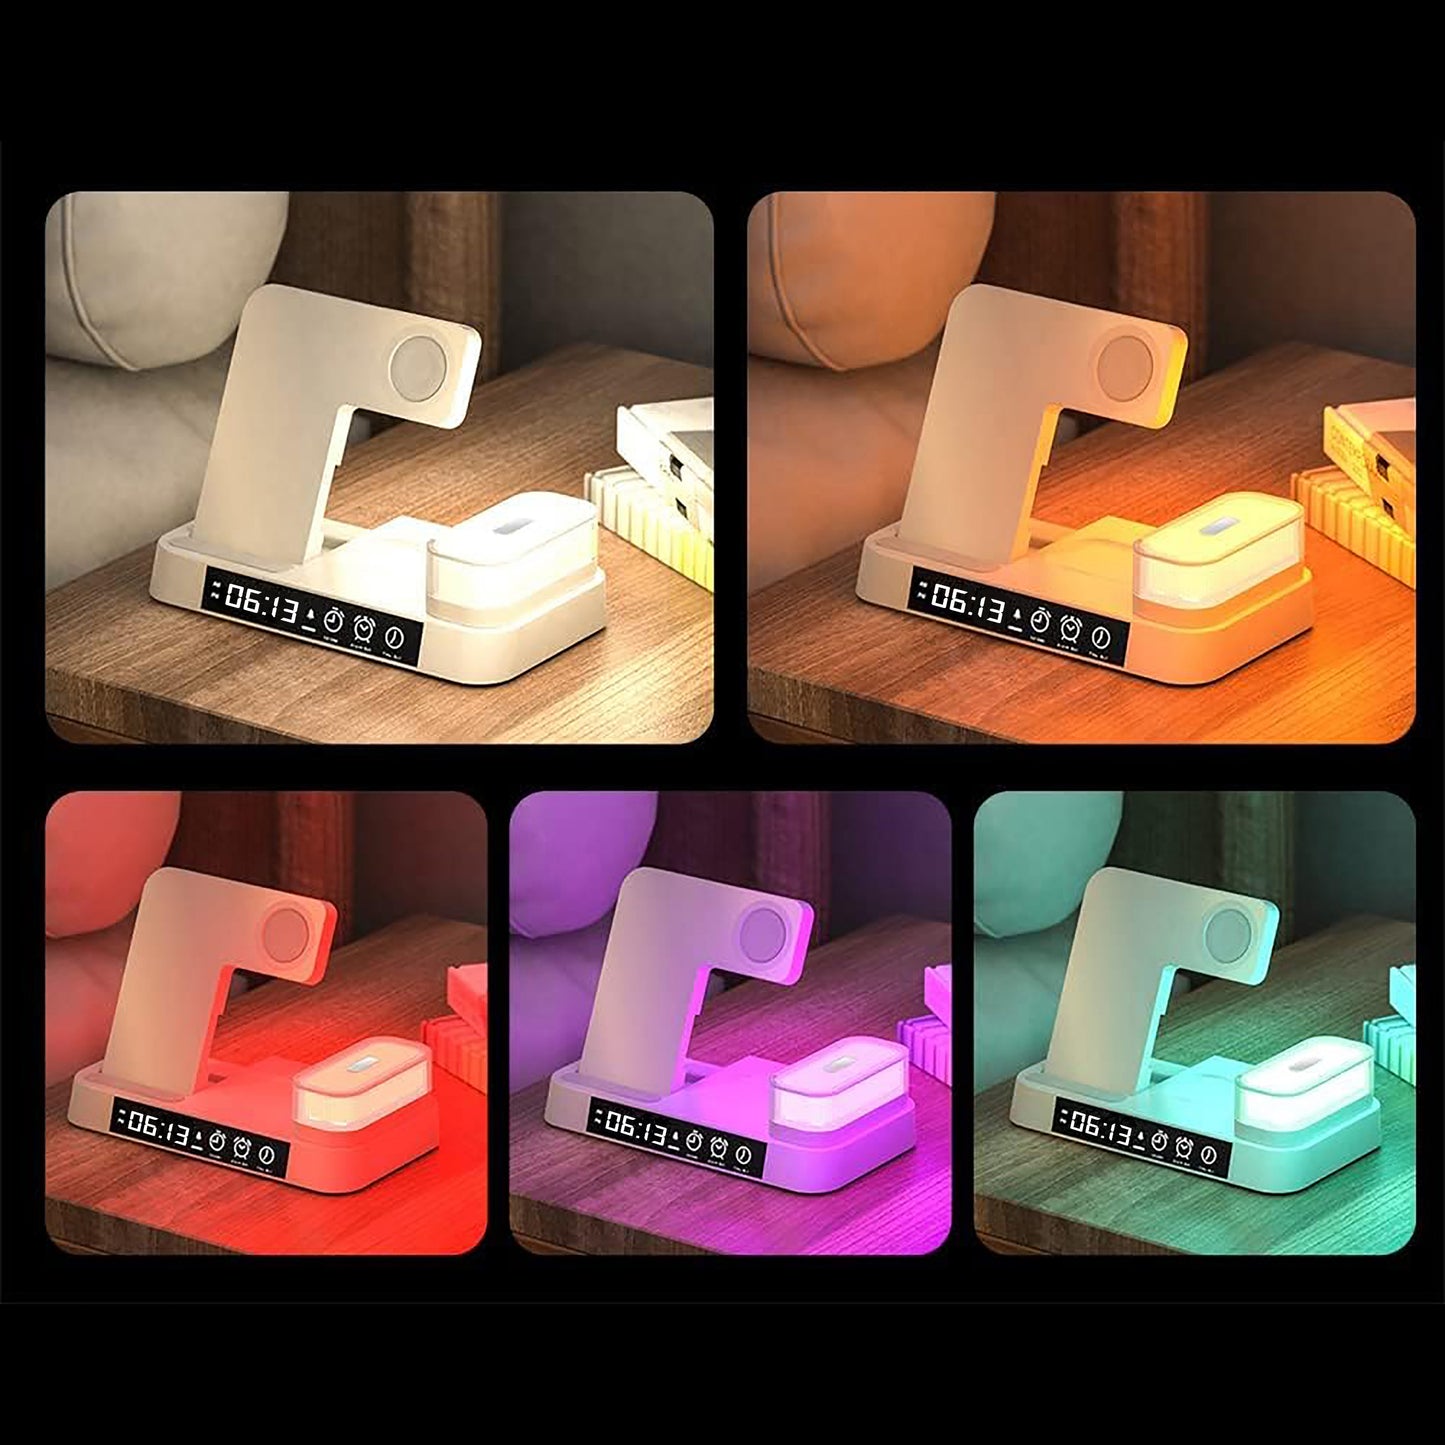 Waloo Wireless Charging Dock With Multi Colored Night Light & Alarm Clock For Apple or Samsung Devices